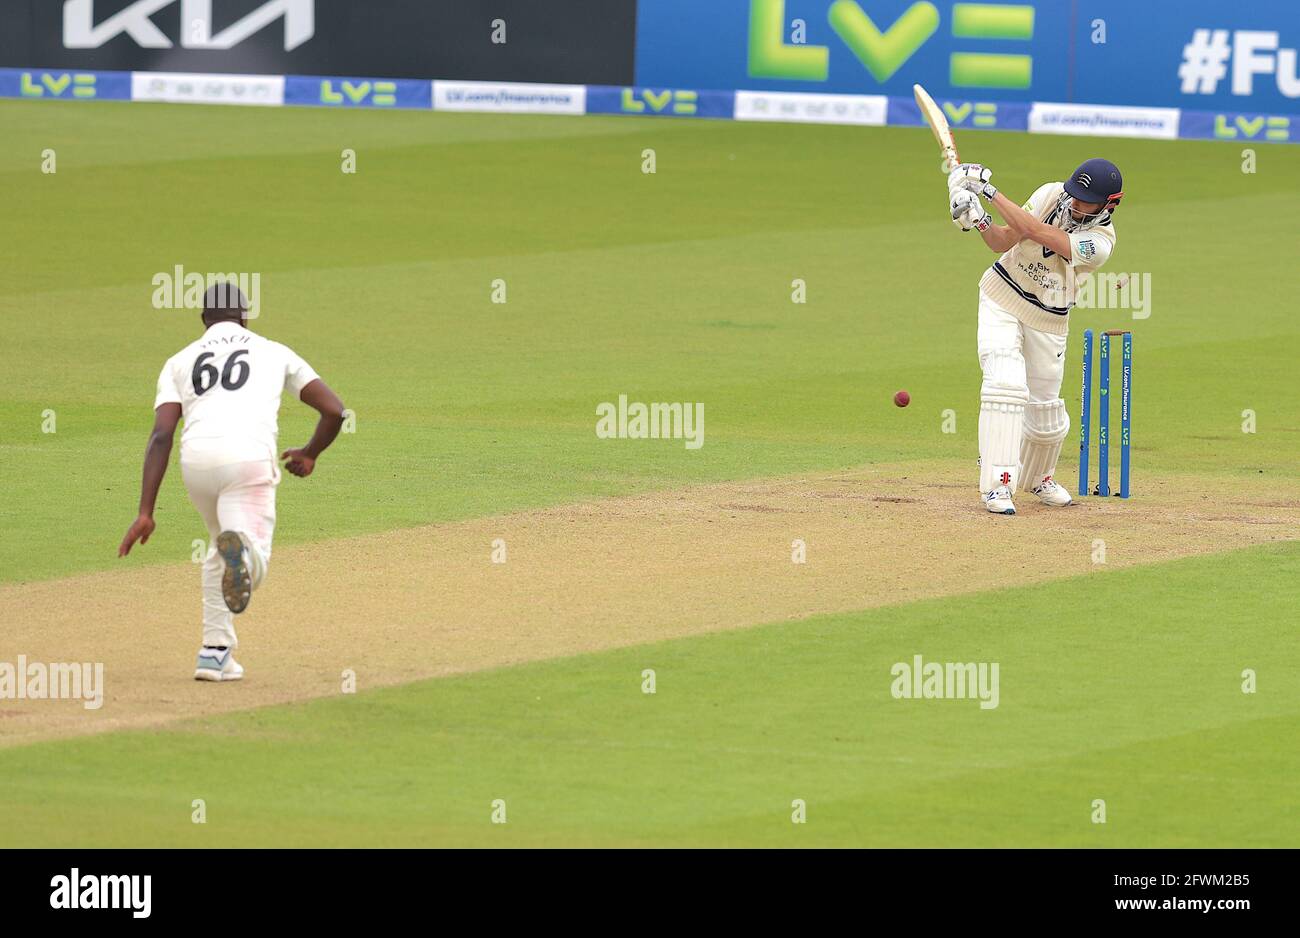 London, UK. 23 May, 2021. London, UK. Surrey’s Kemar Roach bowls Middlesex’s John Simpson as Surrey take on Middlesex in  the County Championship at the Kia Oval, day four. David Rowe/Alamy Live News Stock Photo